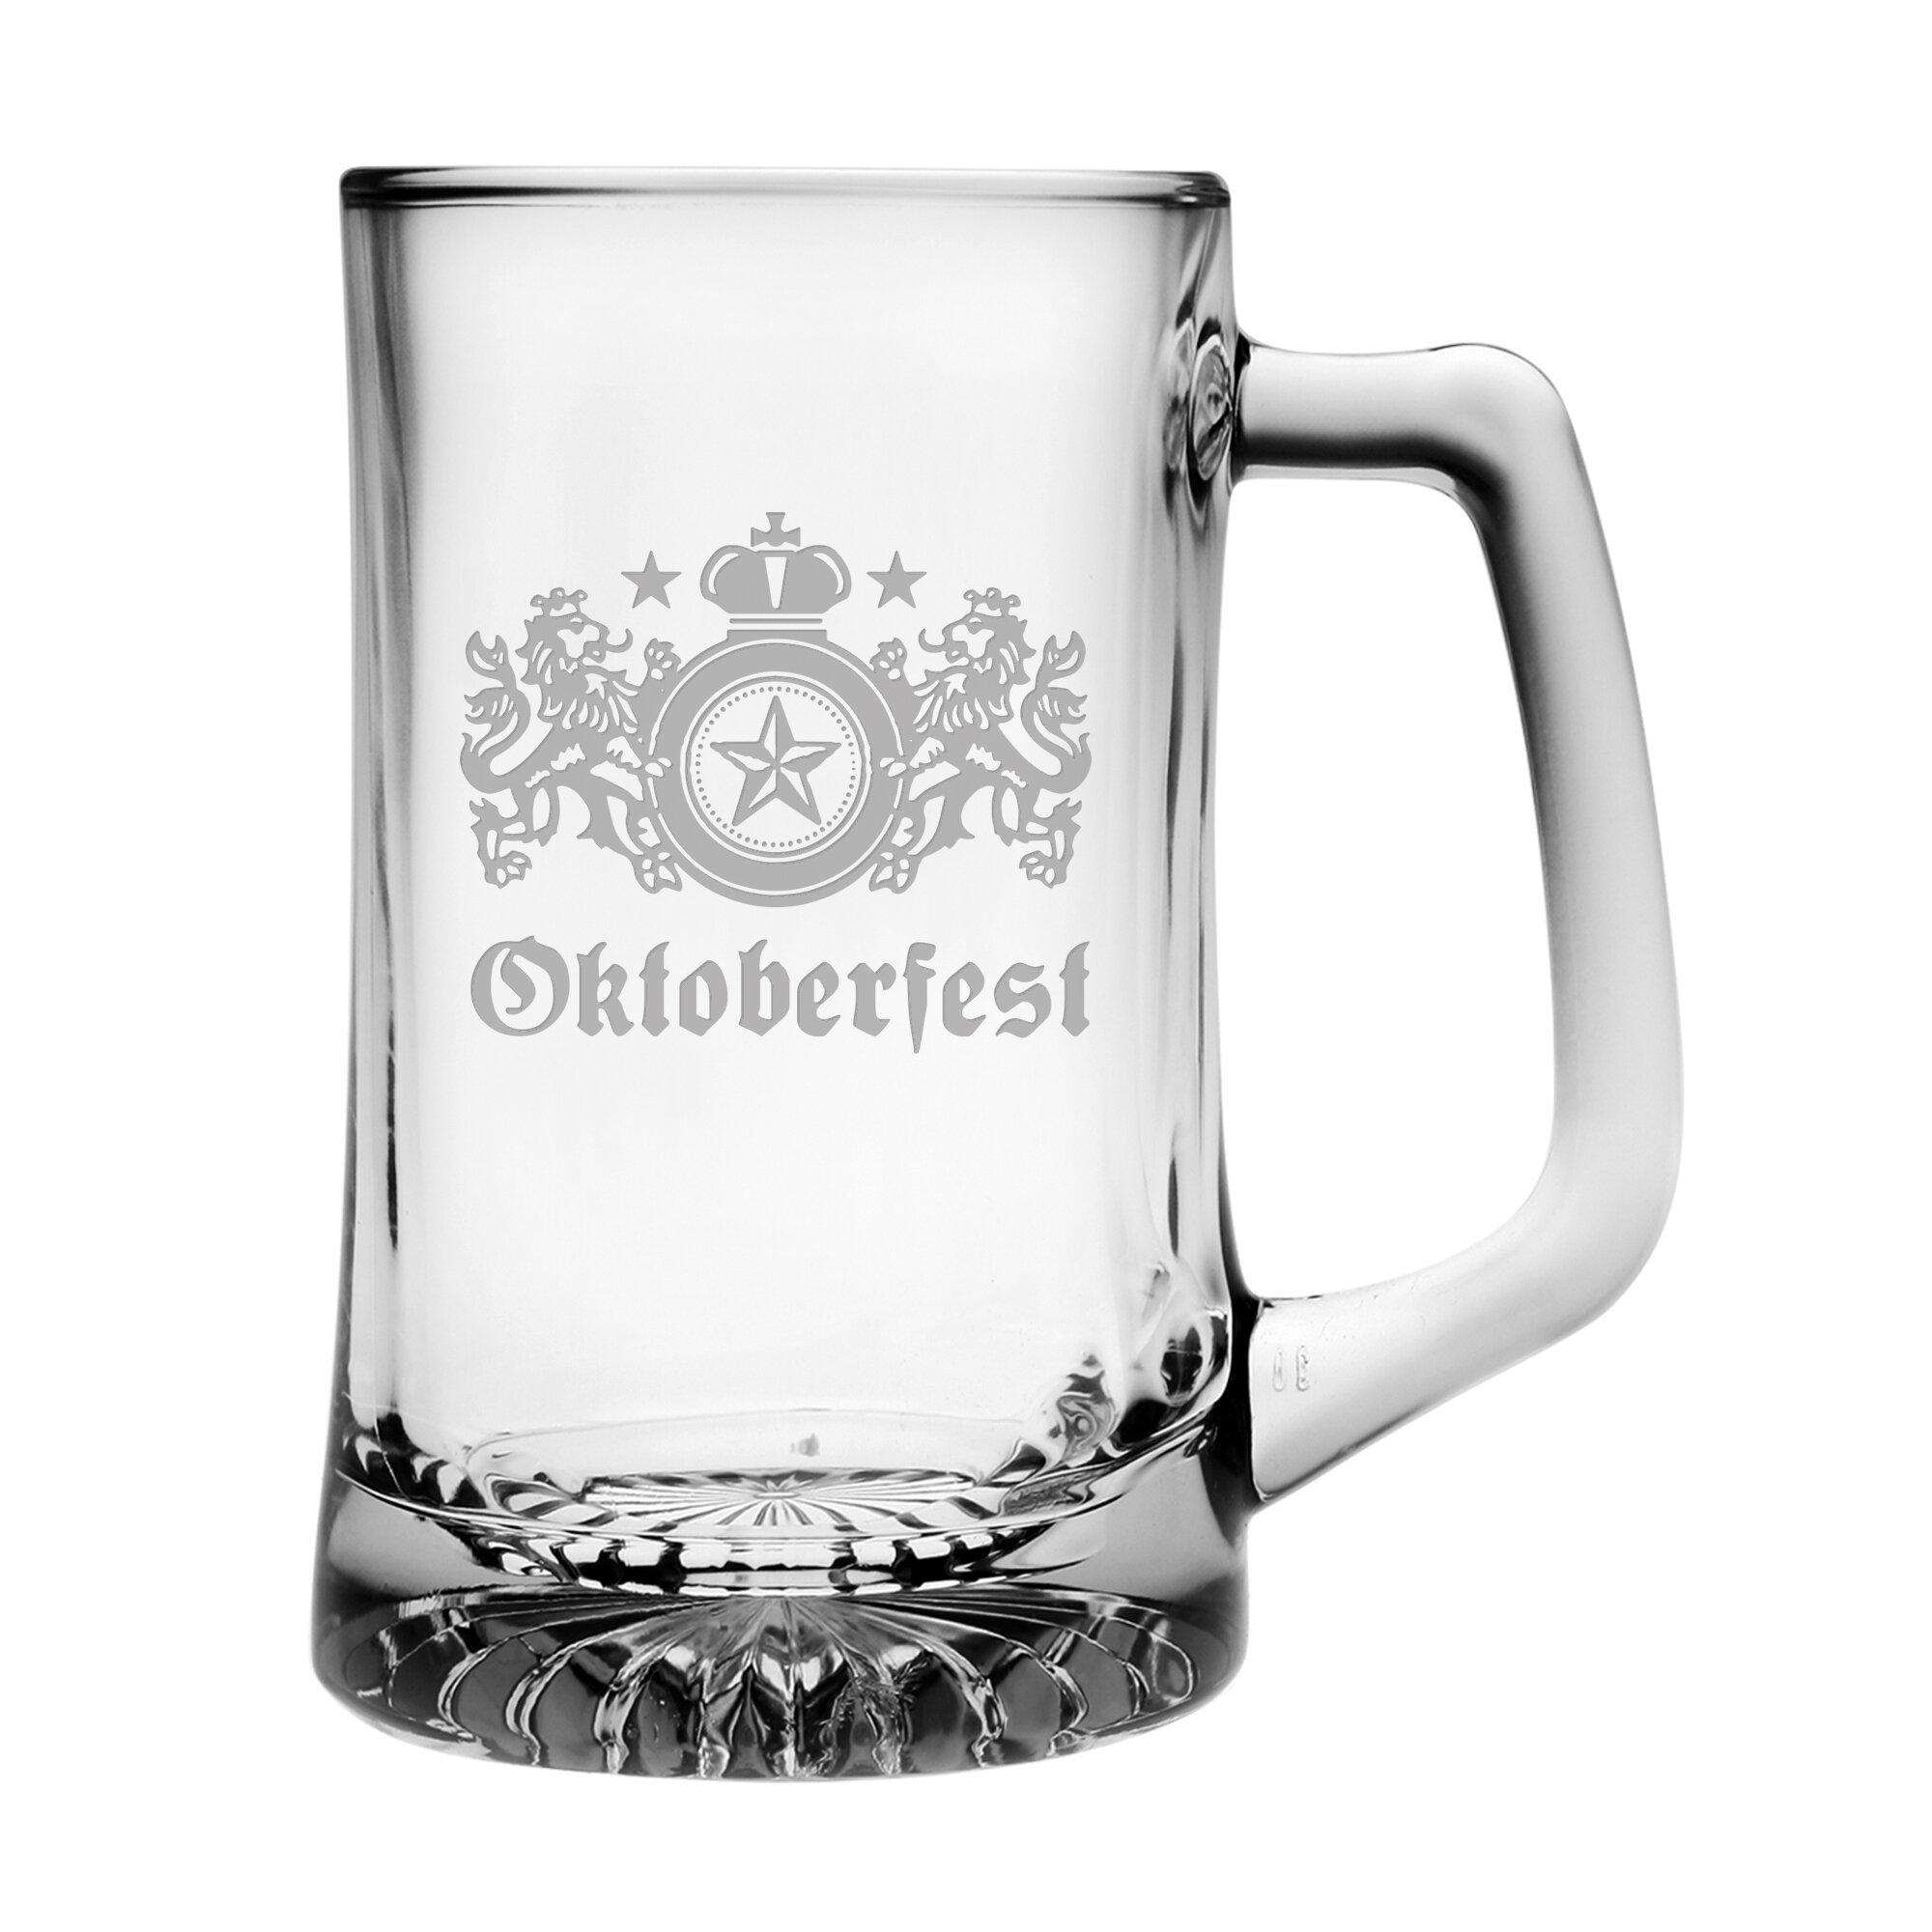 Octoberfest SONO Glass Mug Collectible New Vintage Lg. Details about    New England Brewing Co 